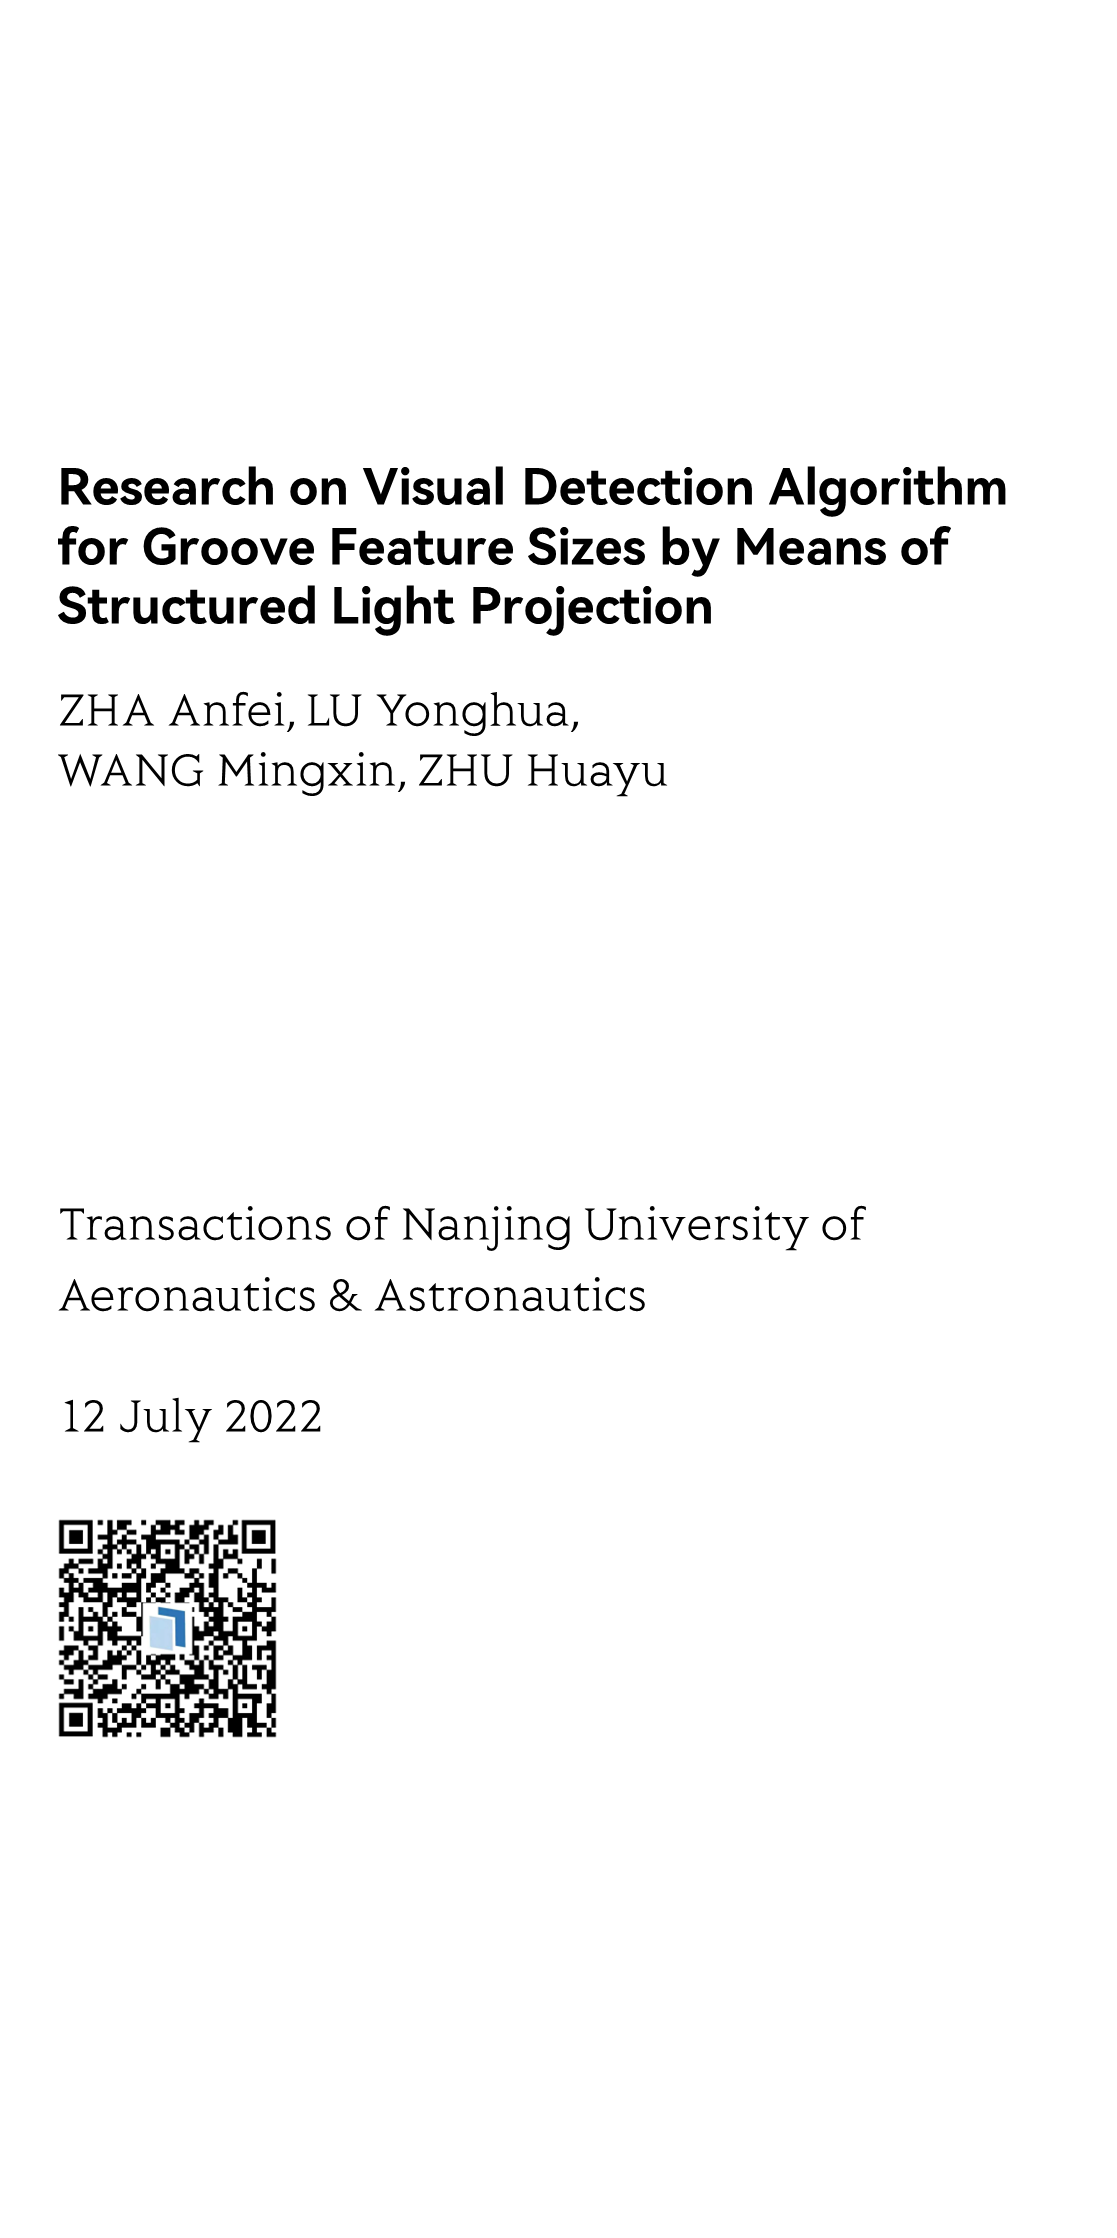 Research on Visual Detection Algorithm for Groove Feature Sizes by Means of Structured Light Projection_1